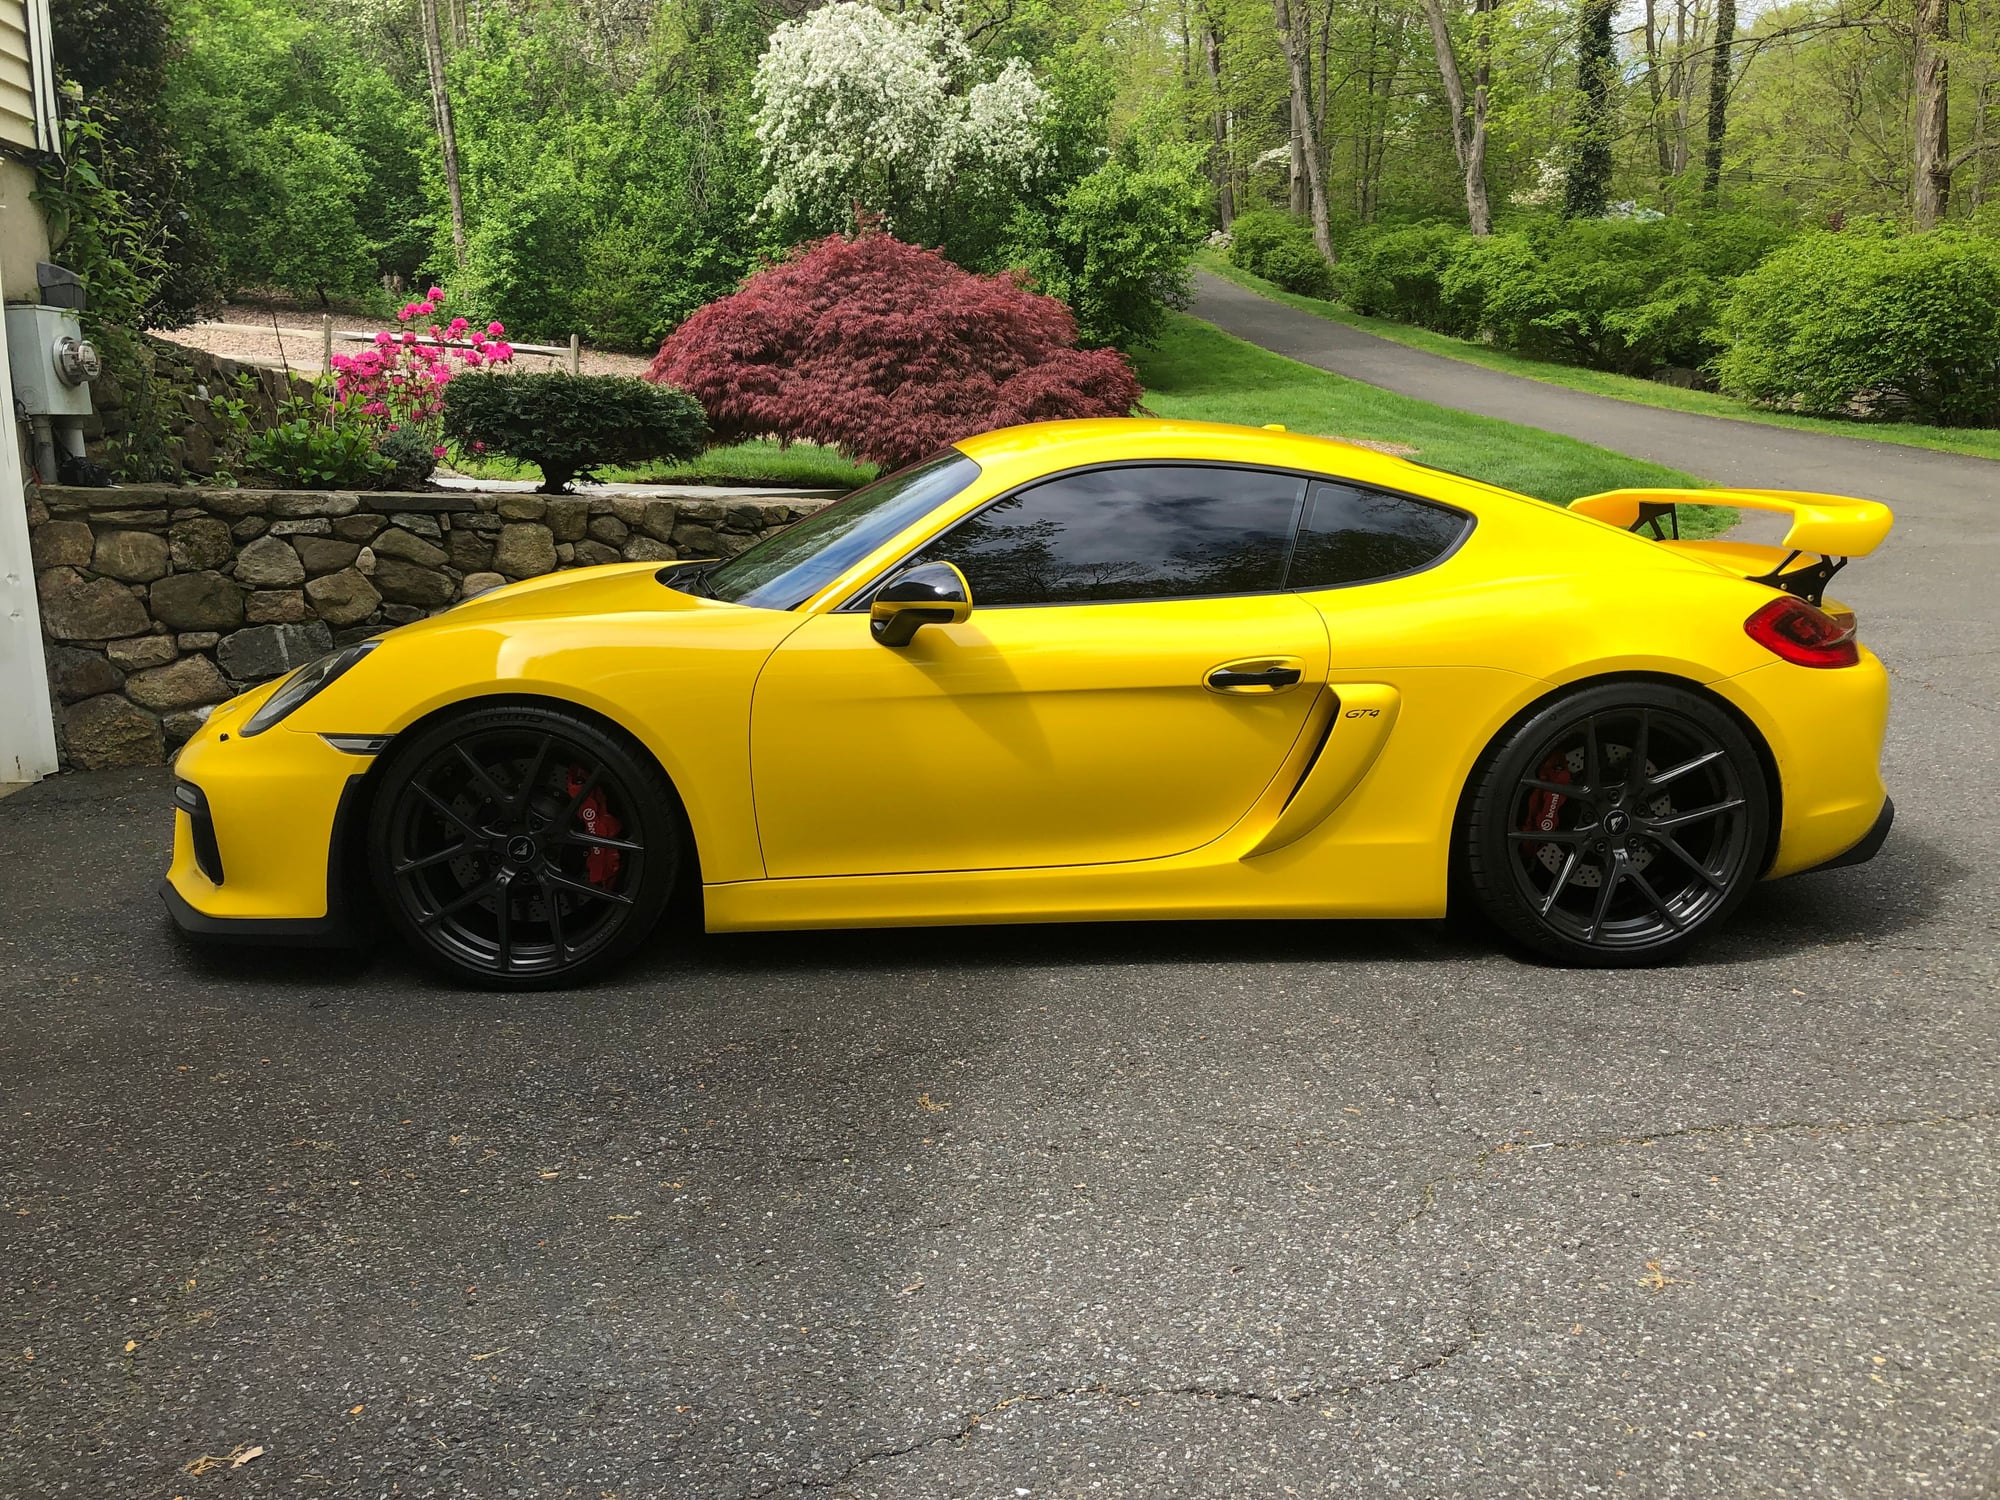 2014 Porsche Cayman - 2014 low mileage Cayman S in Racing Yellow wrap or pristine white - Used - VIN WP0AB2A87EK191524 - 17,000 Miles - 6 cyl - 2WD - Automatic - Coupe - Yellow - Wilton, CT 06897, United States